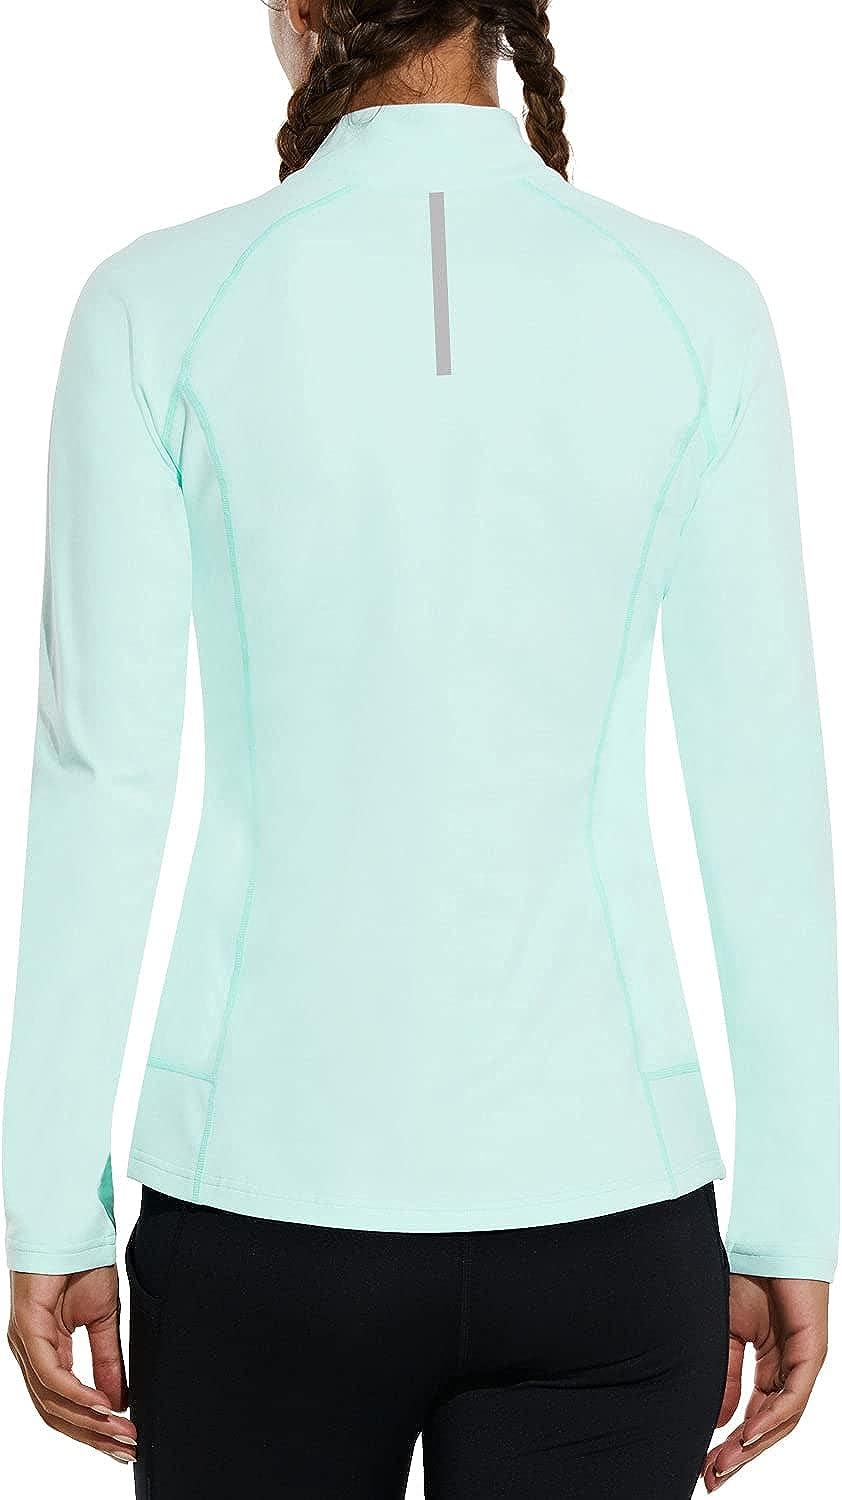 BALEAF Women's Fleece Half-Zip Running Jacket Athletic Pullover Long Sleeve  Thermal Shirts Workout Winter Cold Weather Aqua X-Small